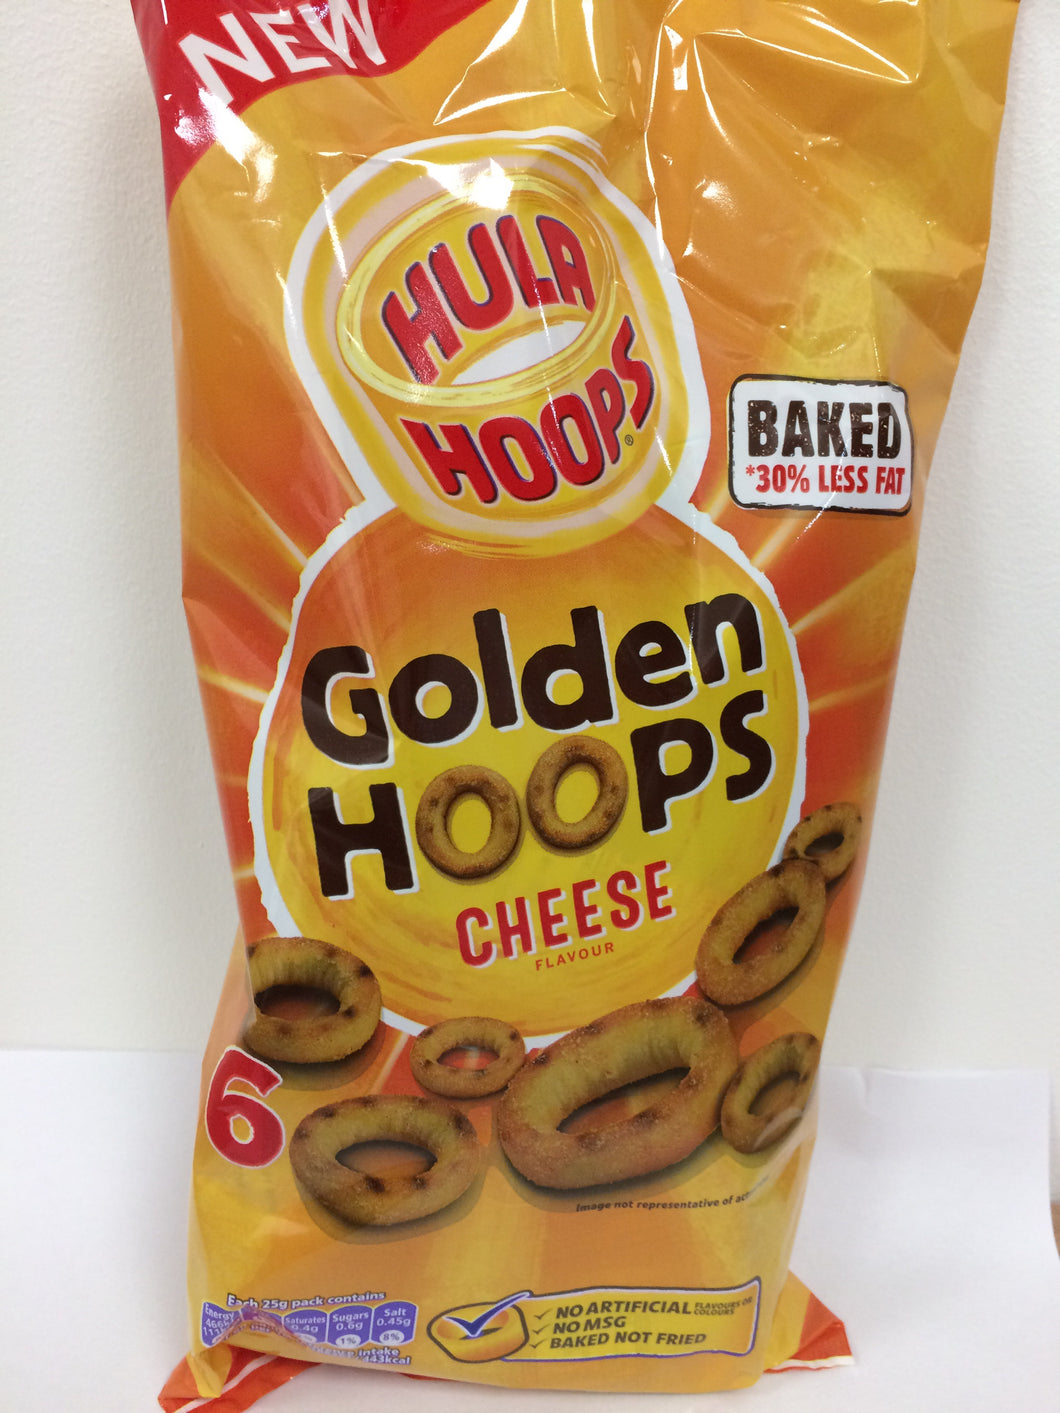 Hula Hoops Golden Hoops Cheese Flavour 6x 25g Bags